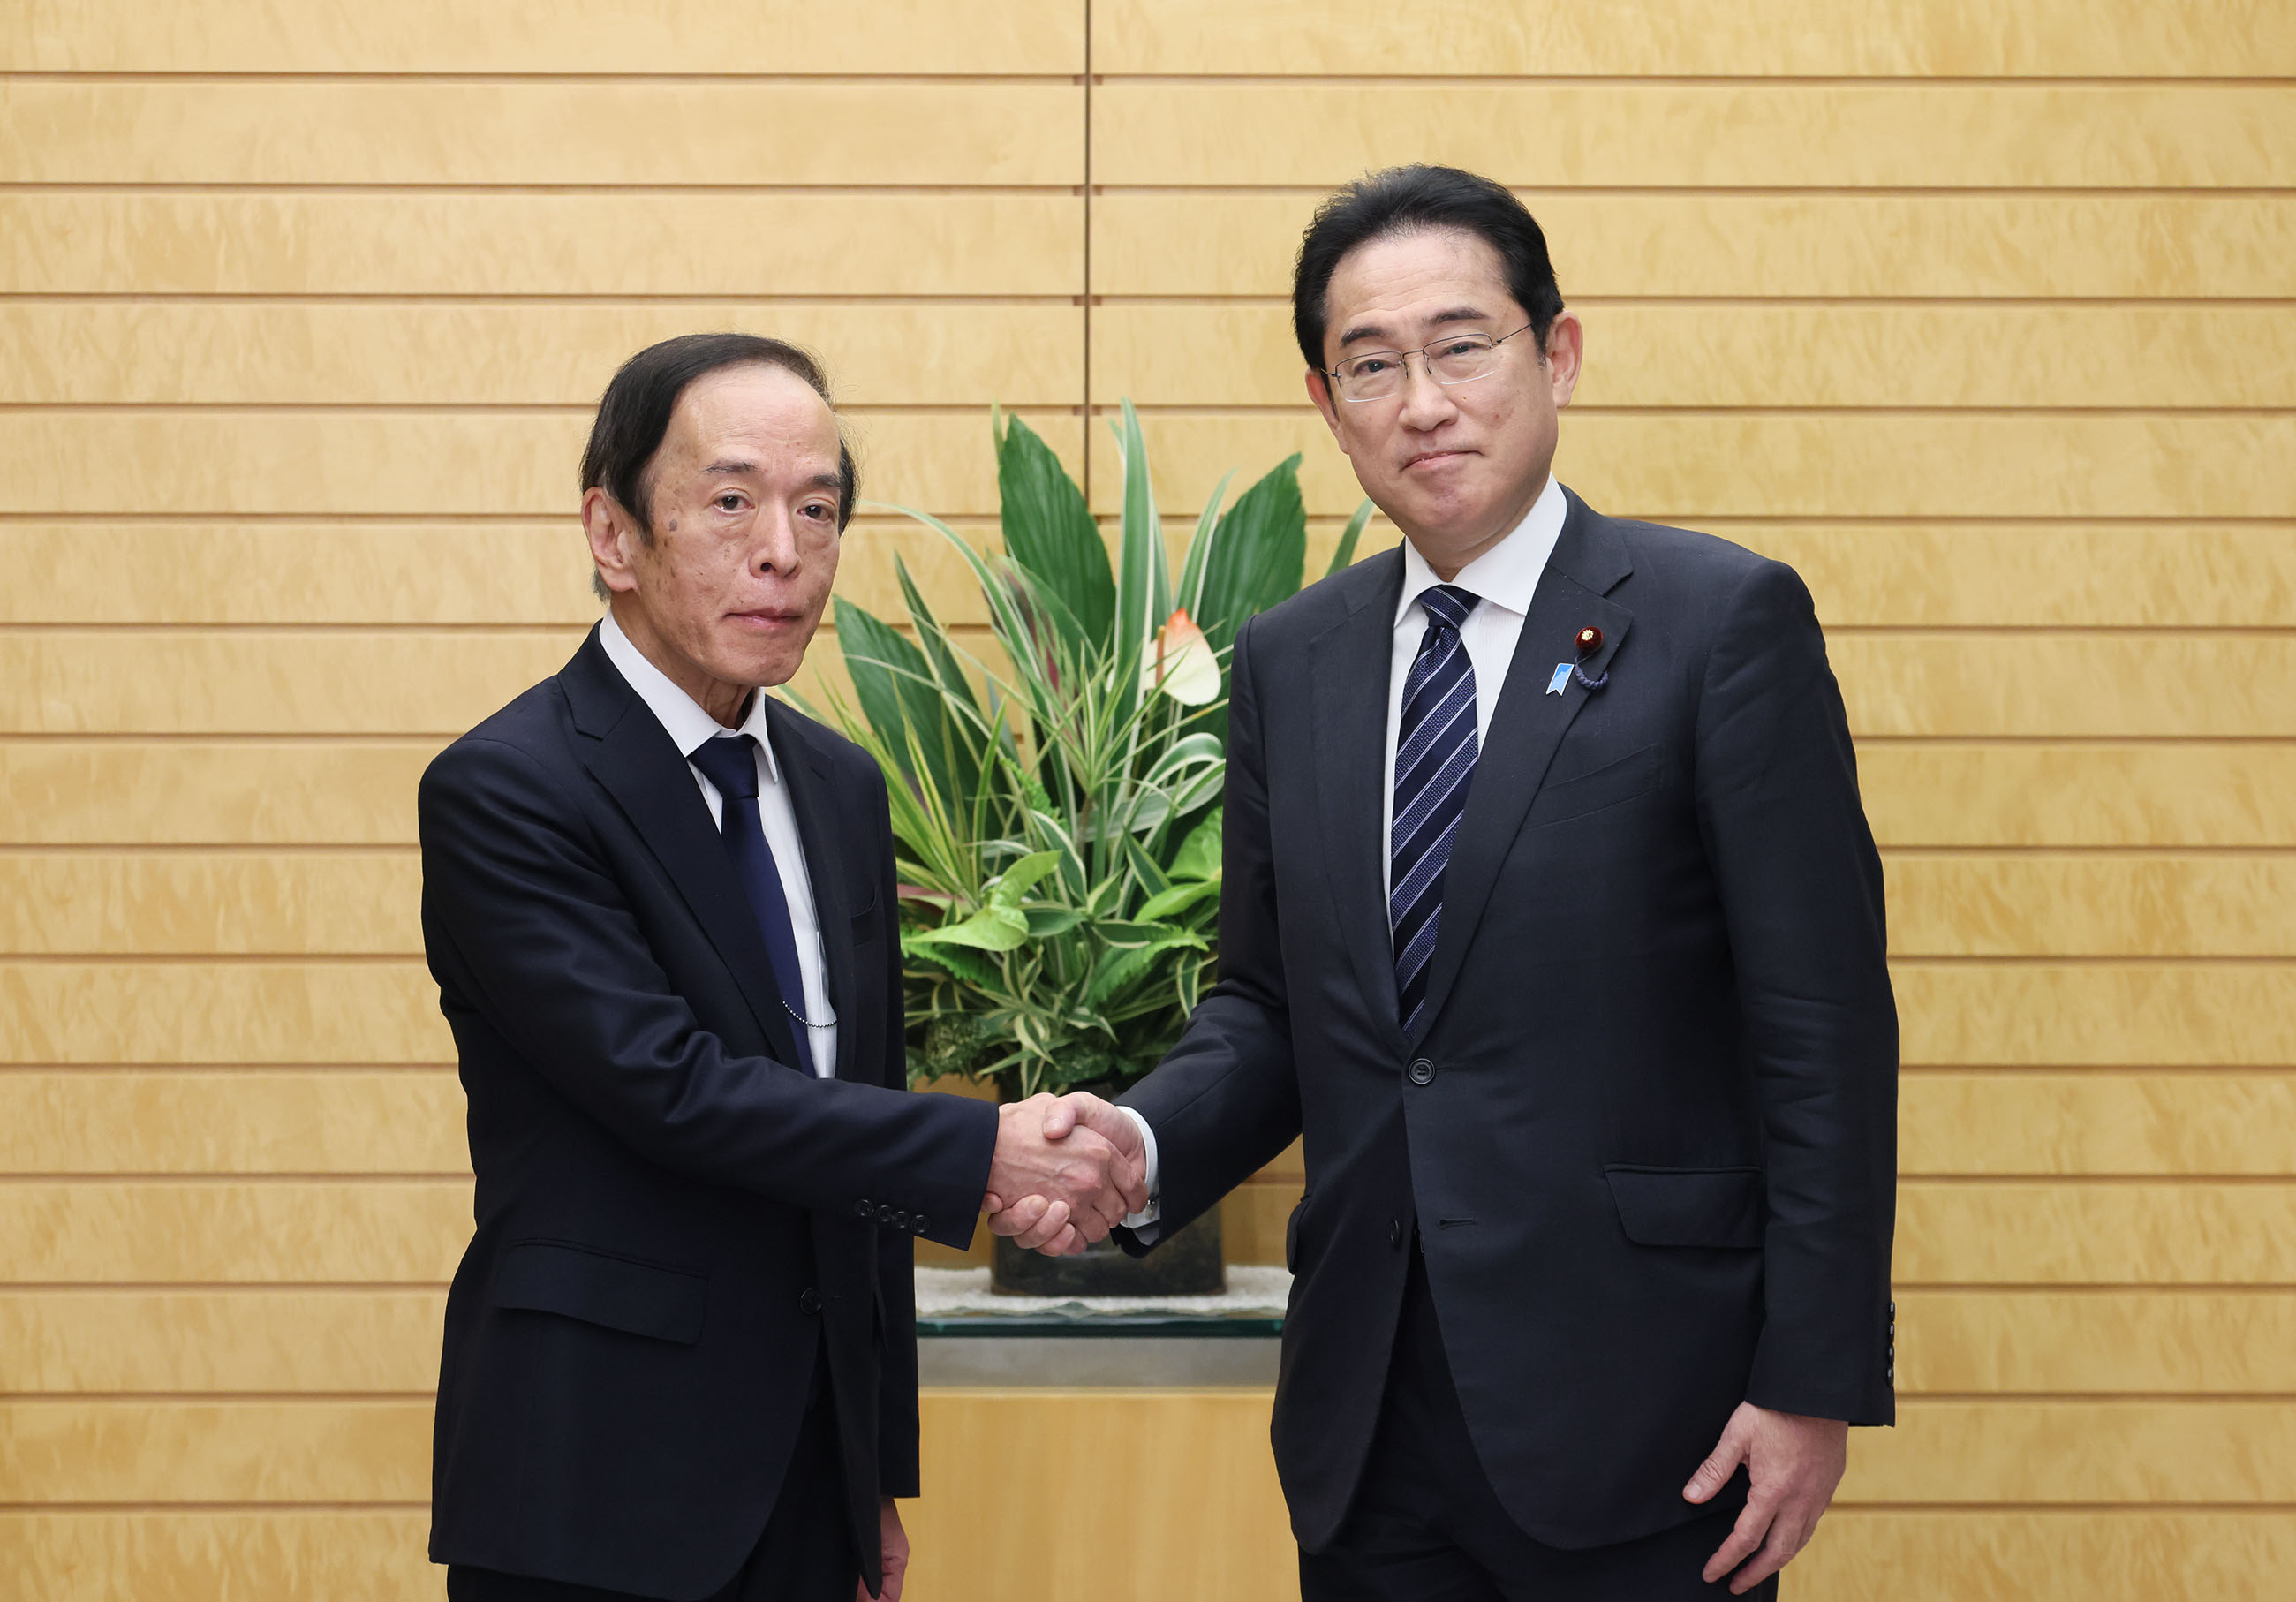 Meeting with the Governor of the Bank of Japan